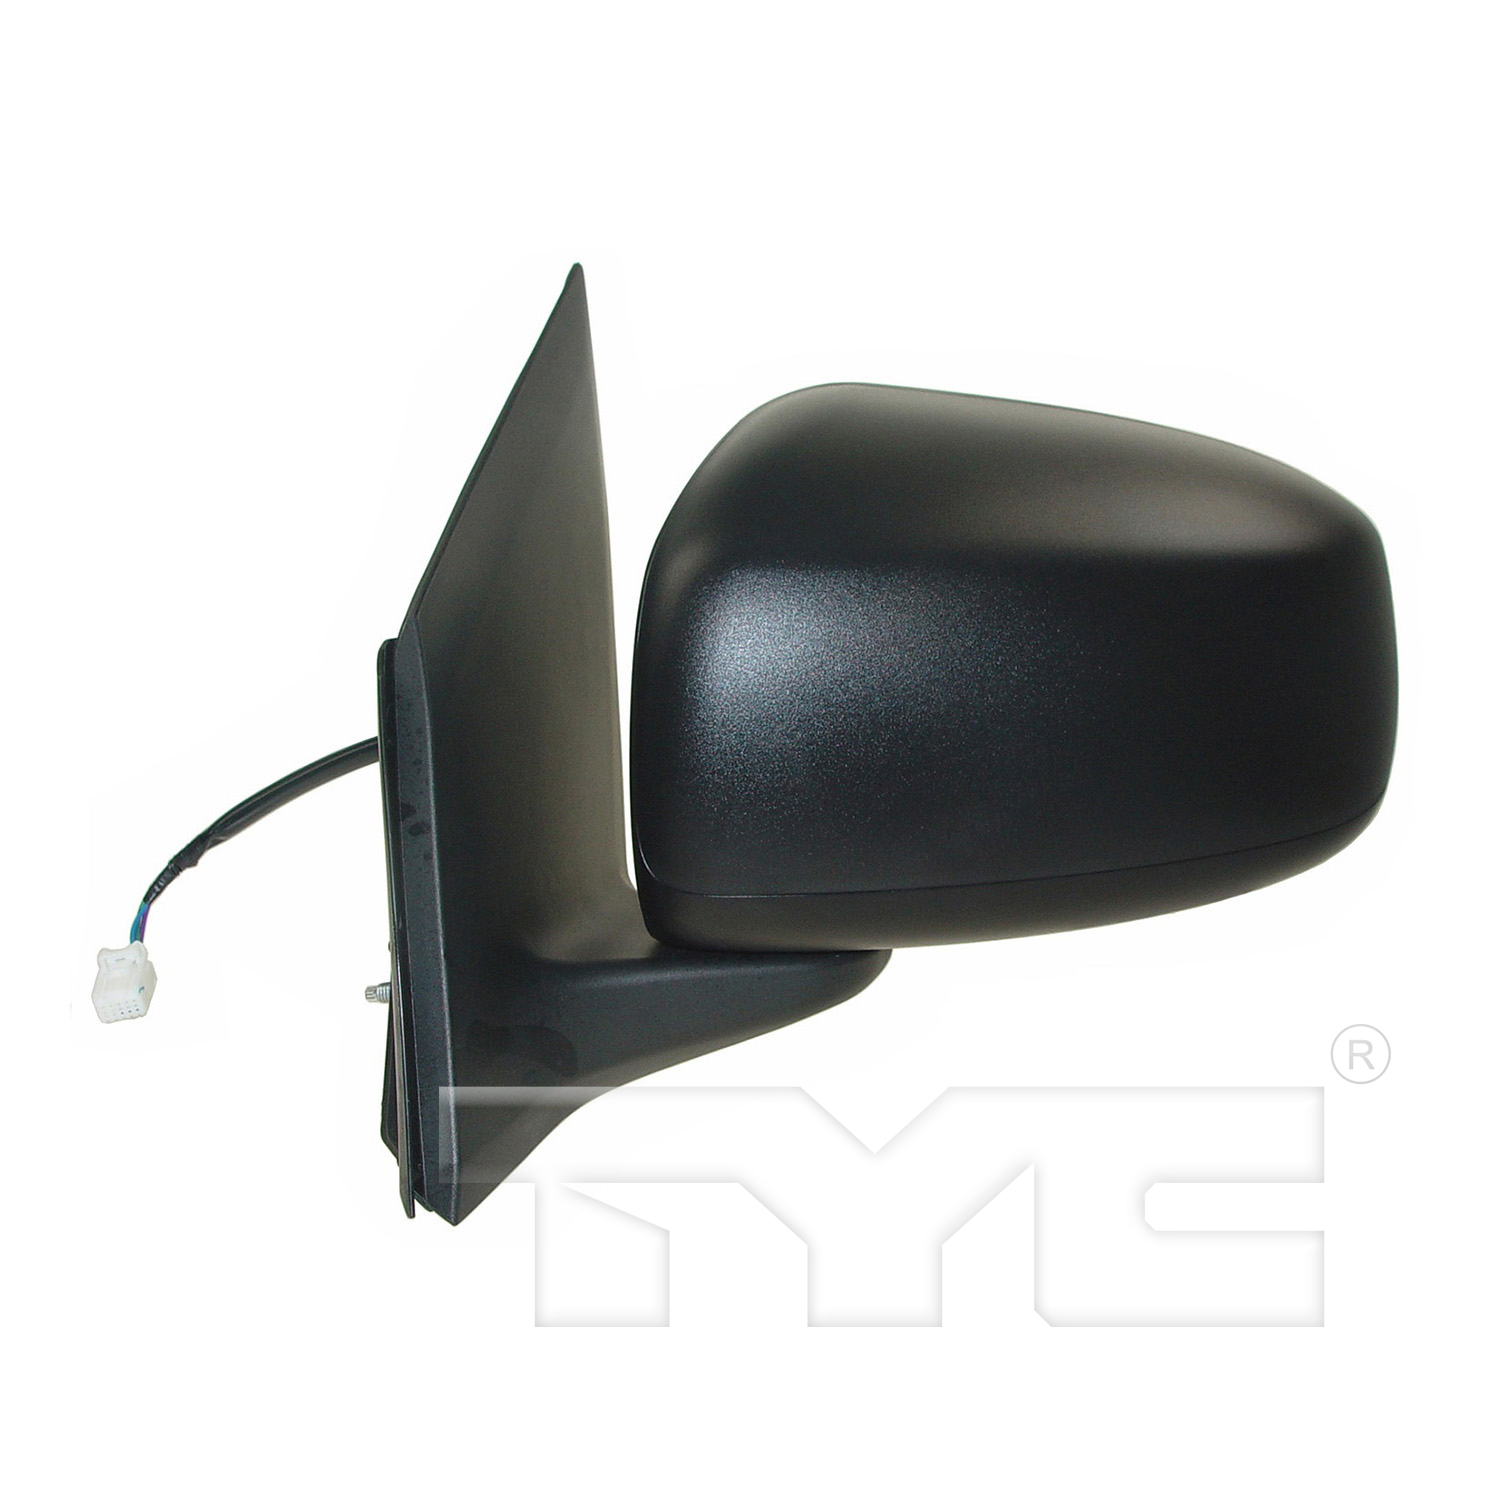 Aftermarket MIRRORS for MITSUBISHI - MIRAGE, MIRAGE,14-22,LT Mirror outside rear view